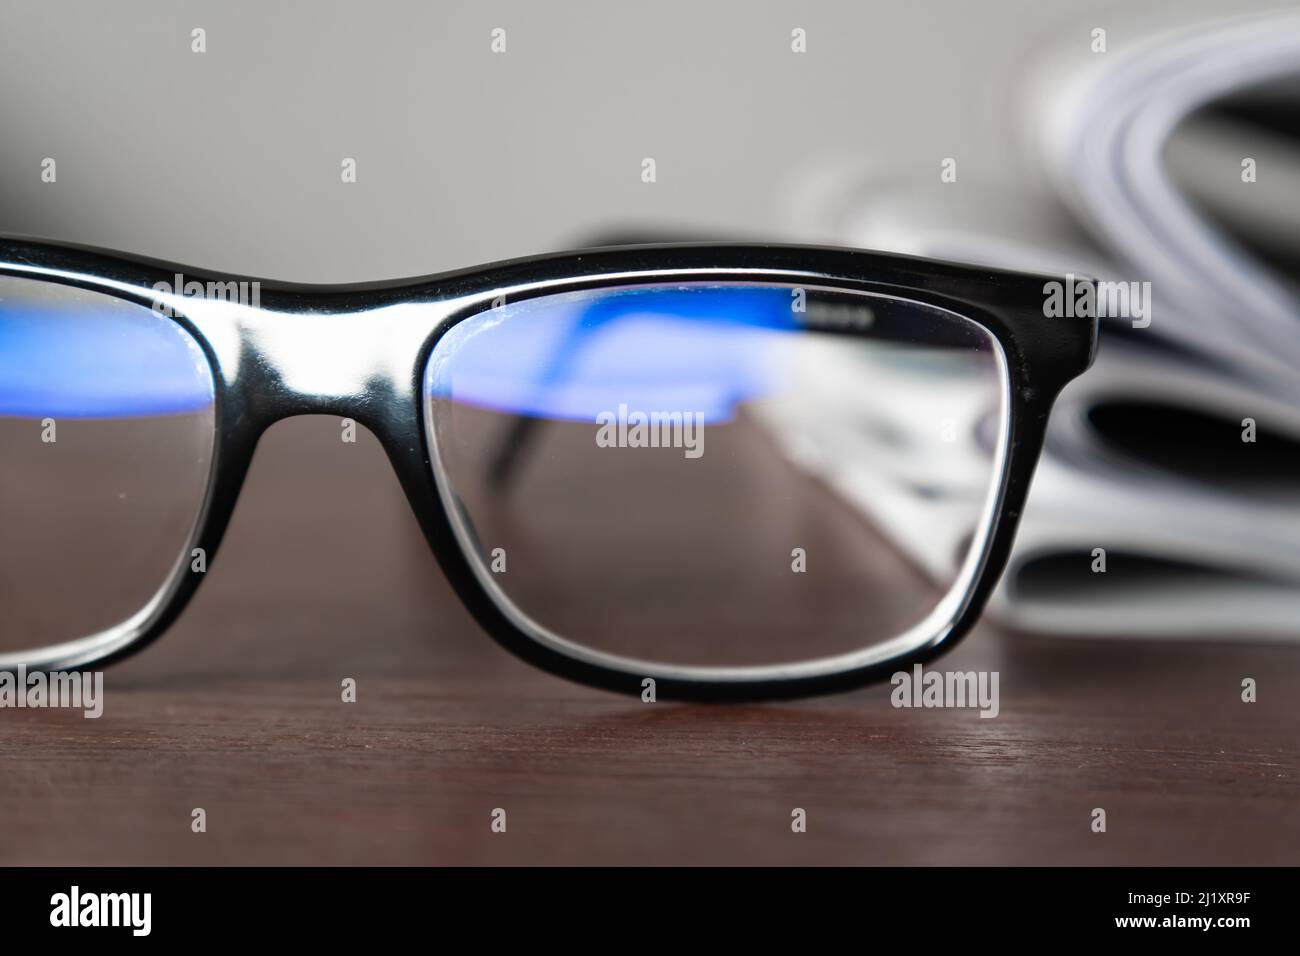 An eyeglasses with blue light protection lenses Stock Photo